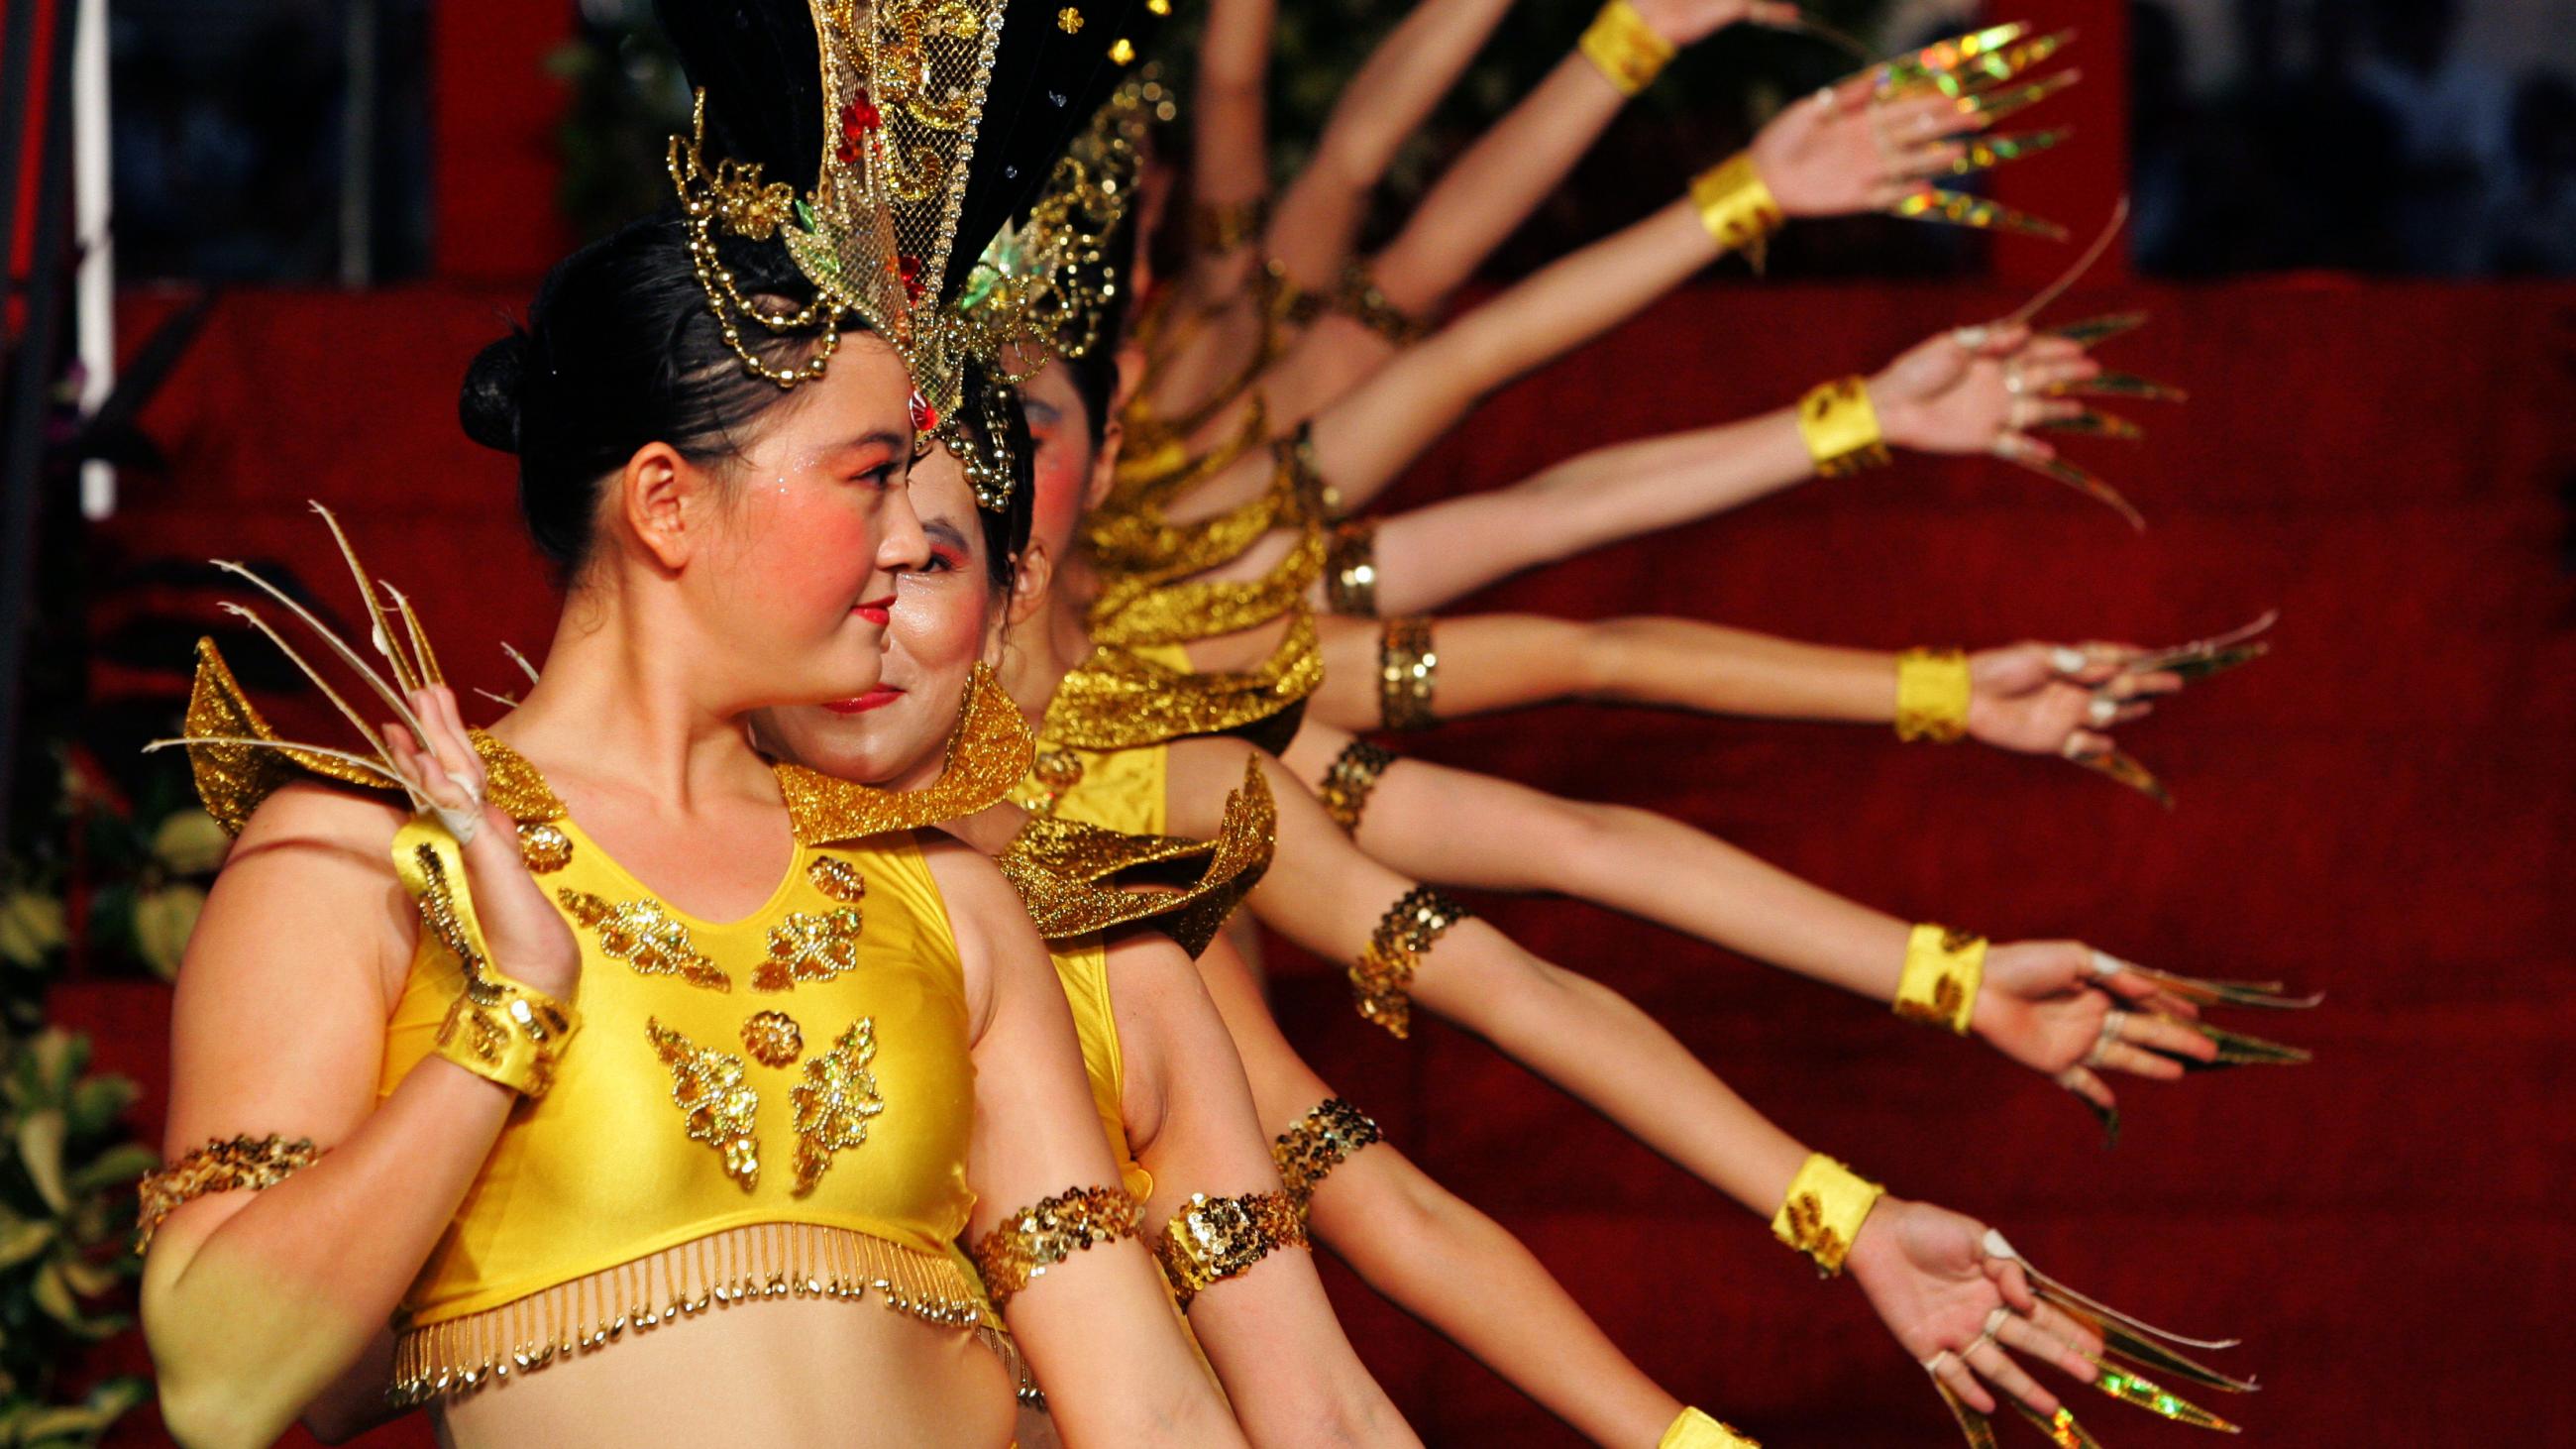 Performers dance during the opening ceremony of the Chinatown Mid-Autumn Festival 2005 in Singapore September 4, 2005.